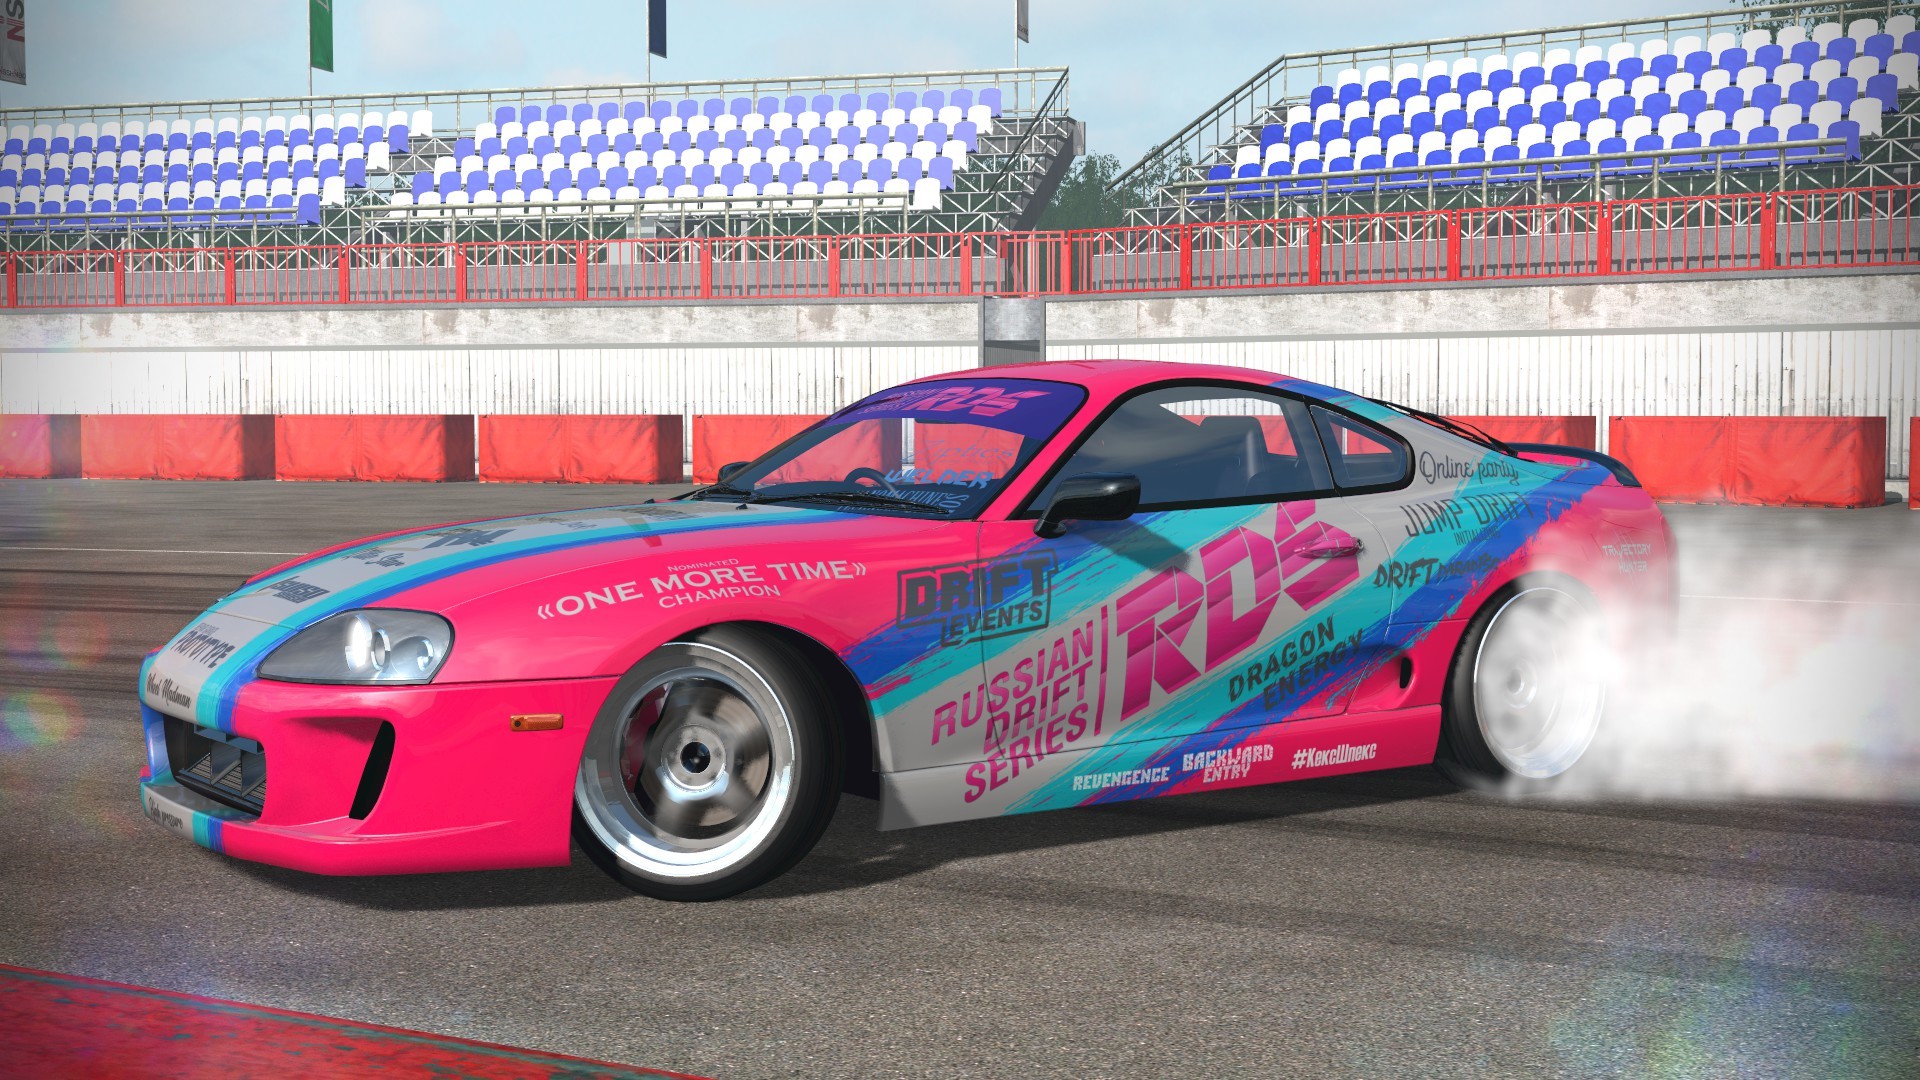 RDS The Official Drift Videogame Free Download